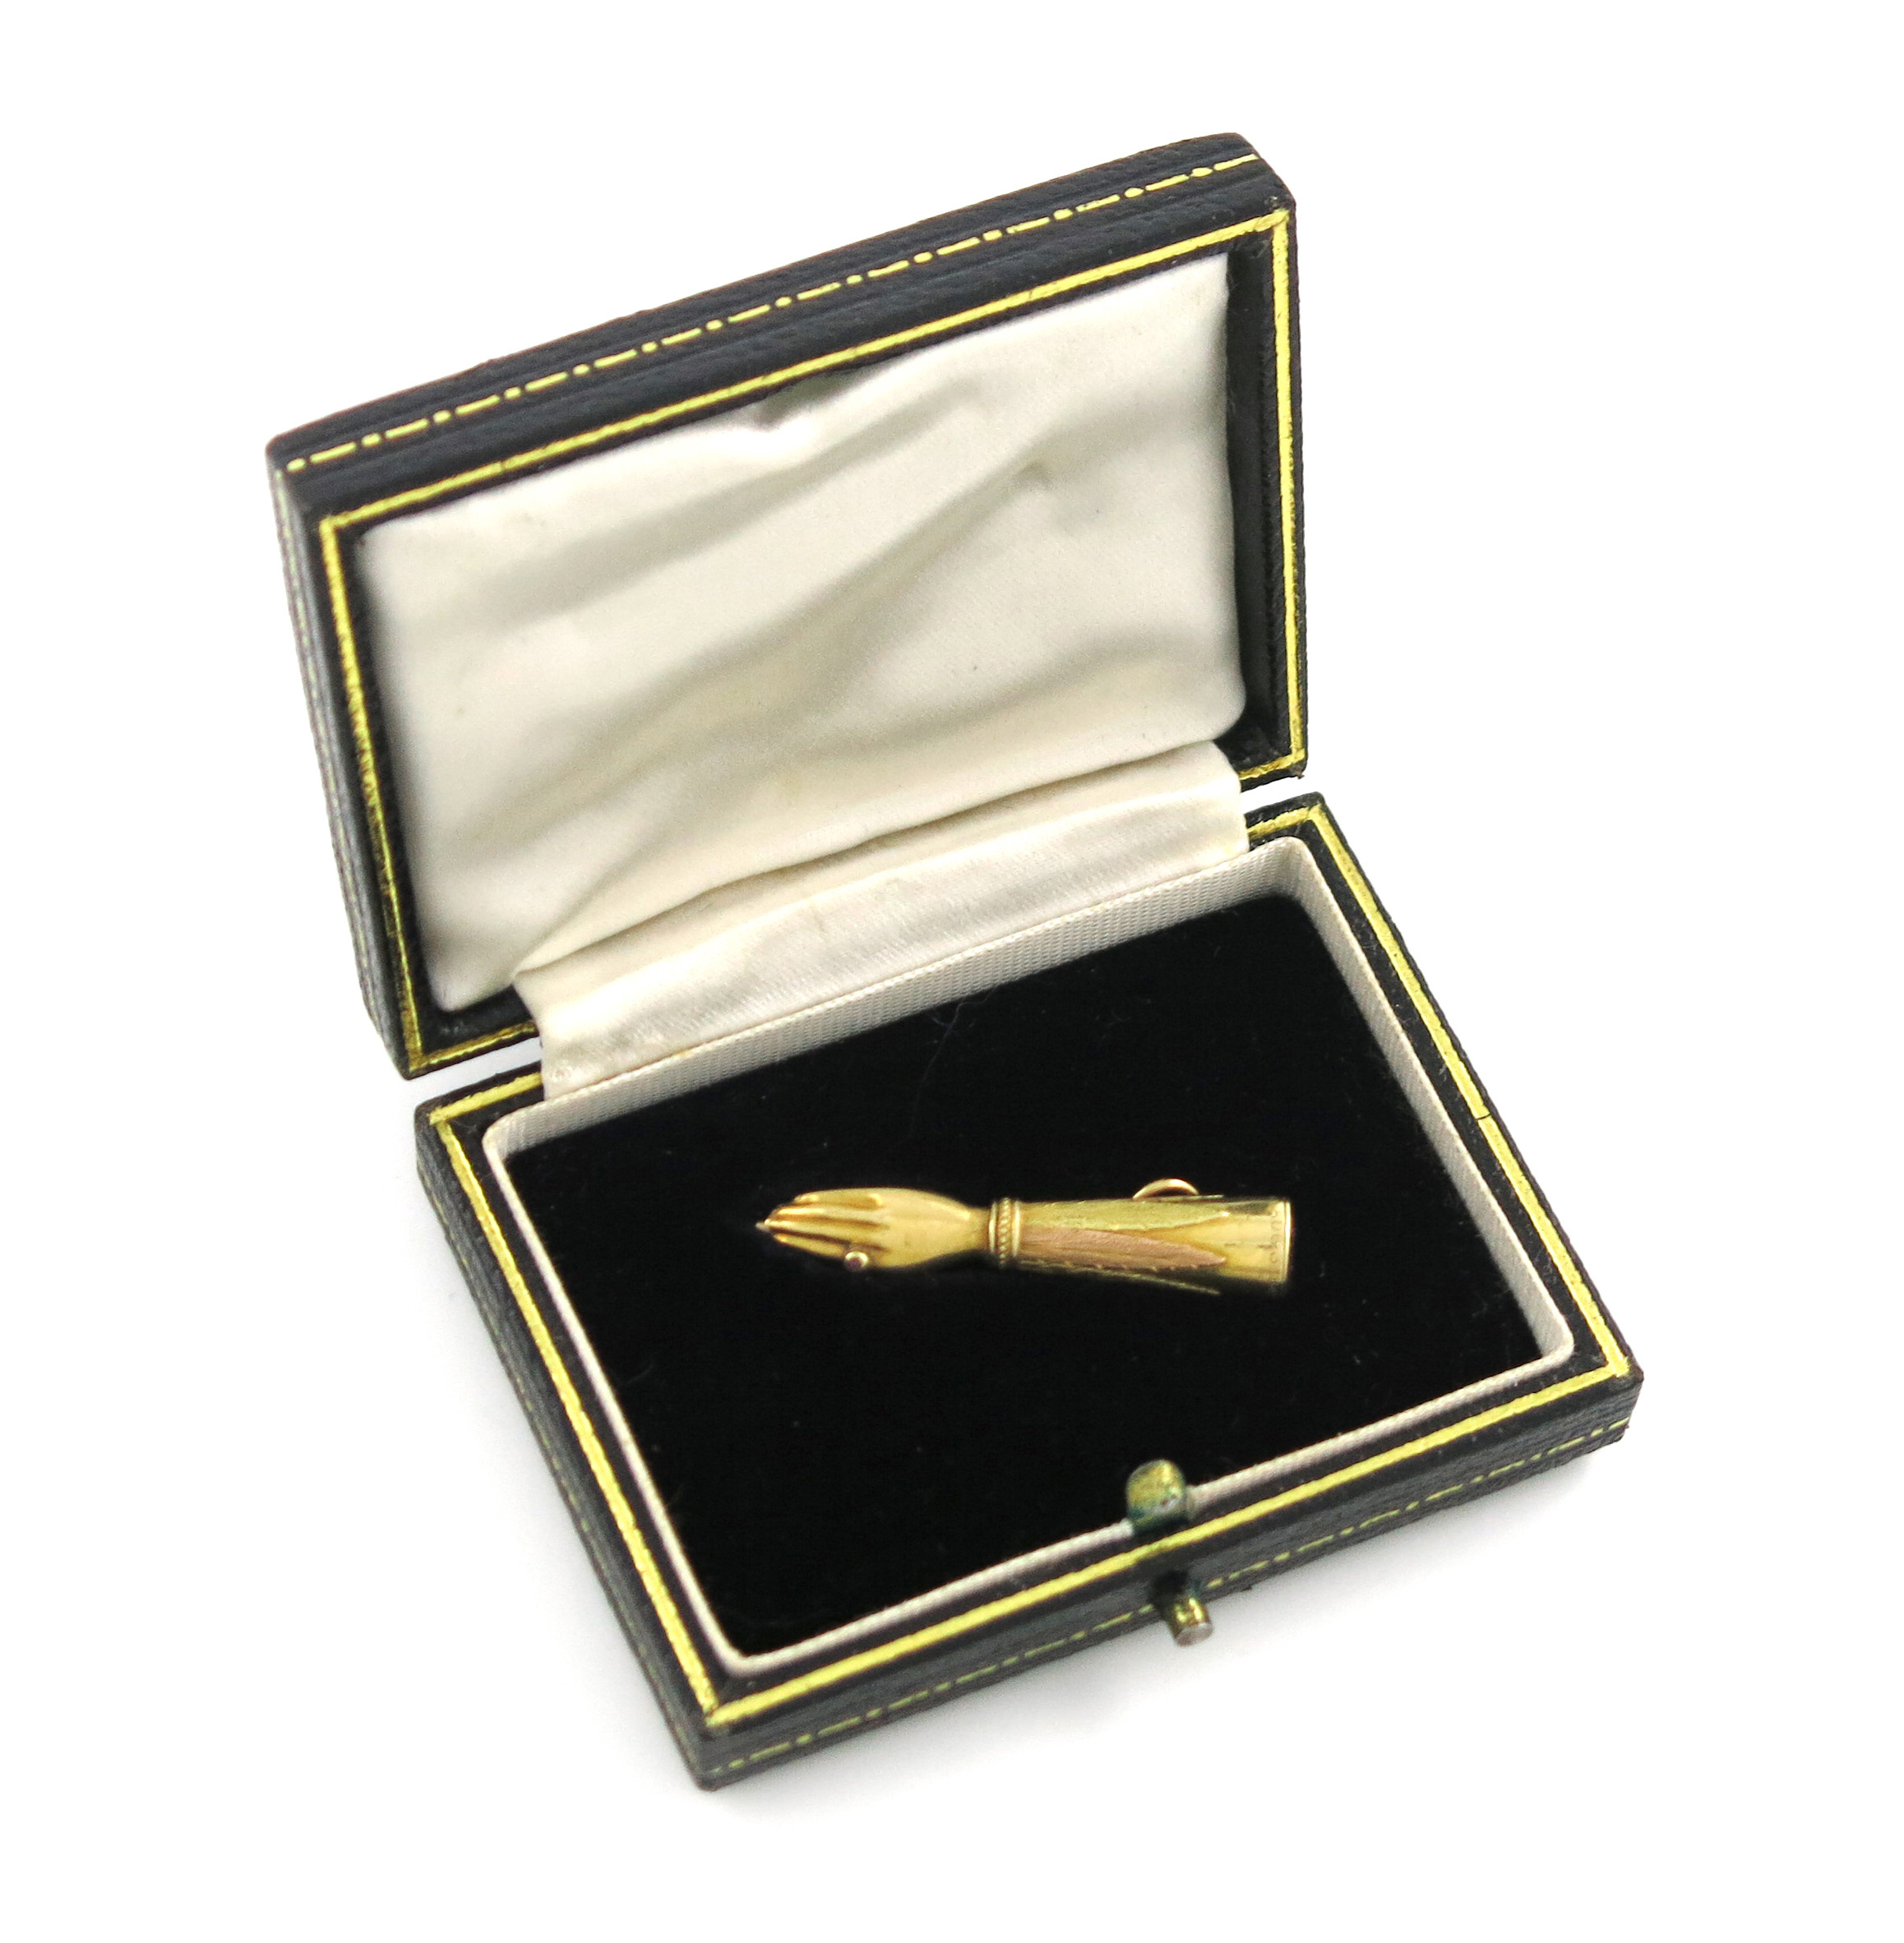 A Victorian novelty gold pencil, by S. Mordan, marked 'S. Mordan Aug 3, 1842, No. 1390', modelled as